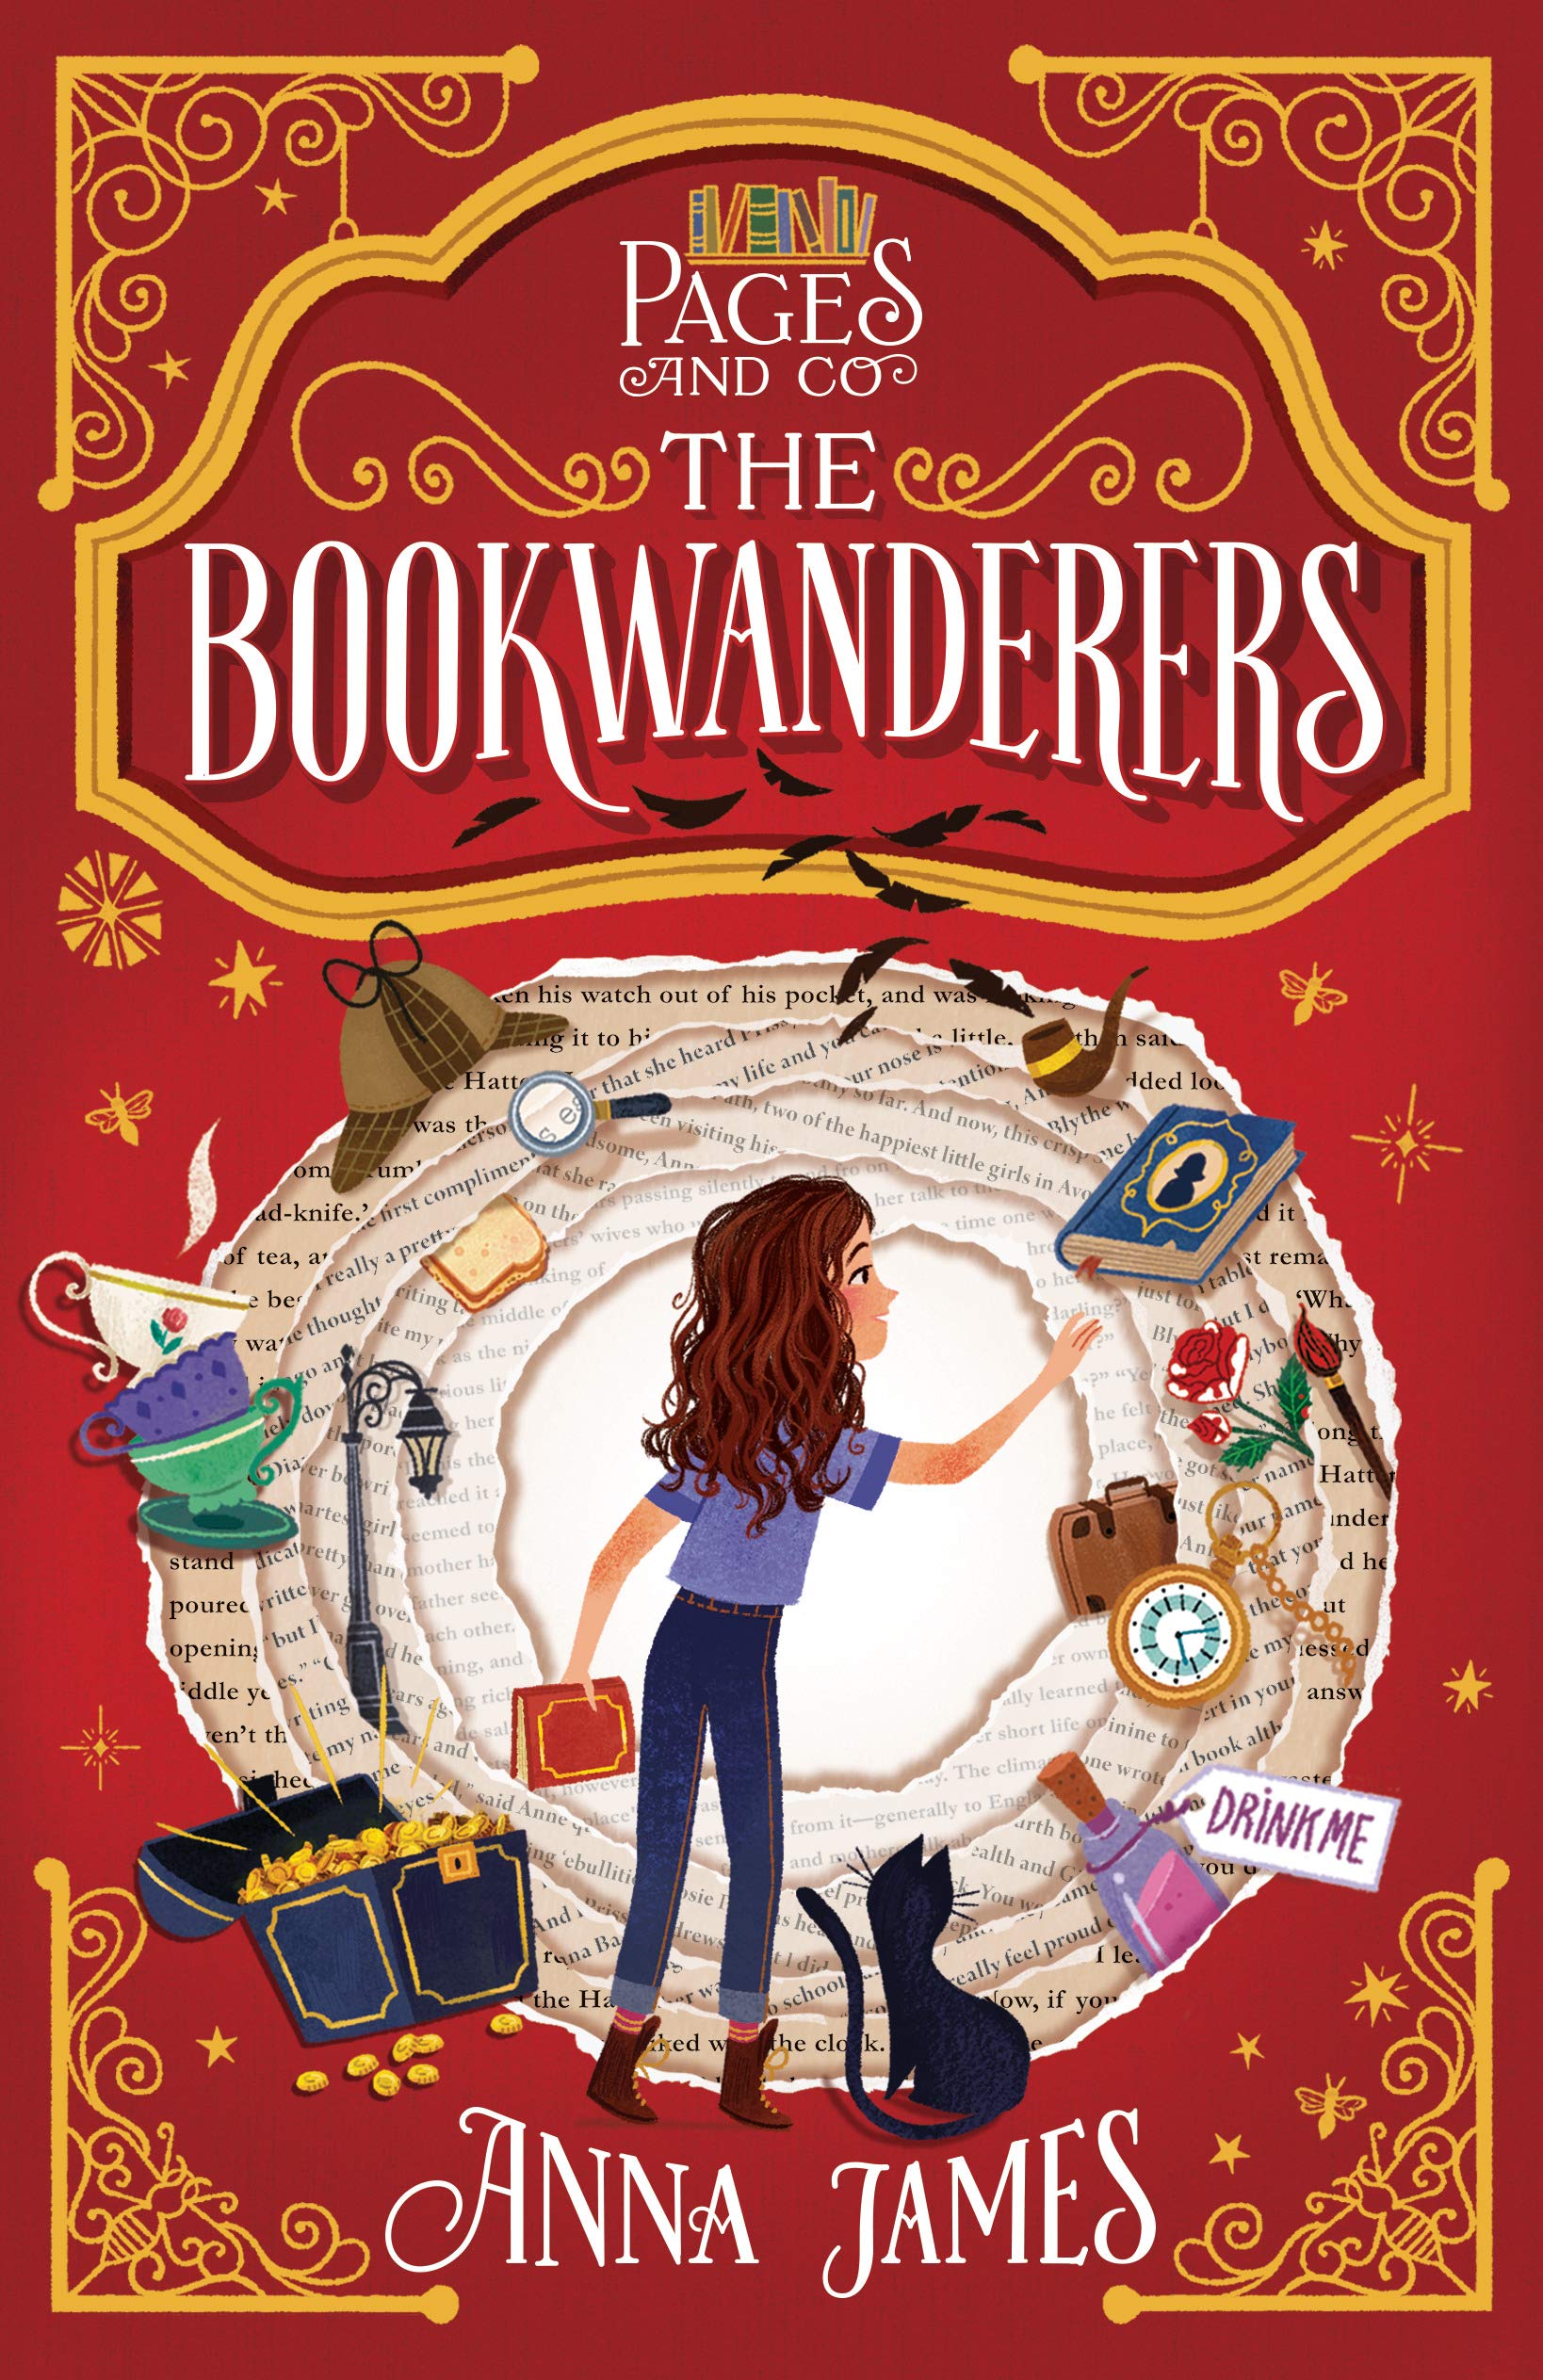 Image of "The Bookwanderers"